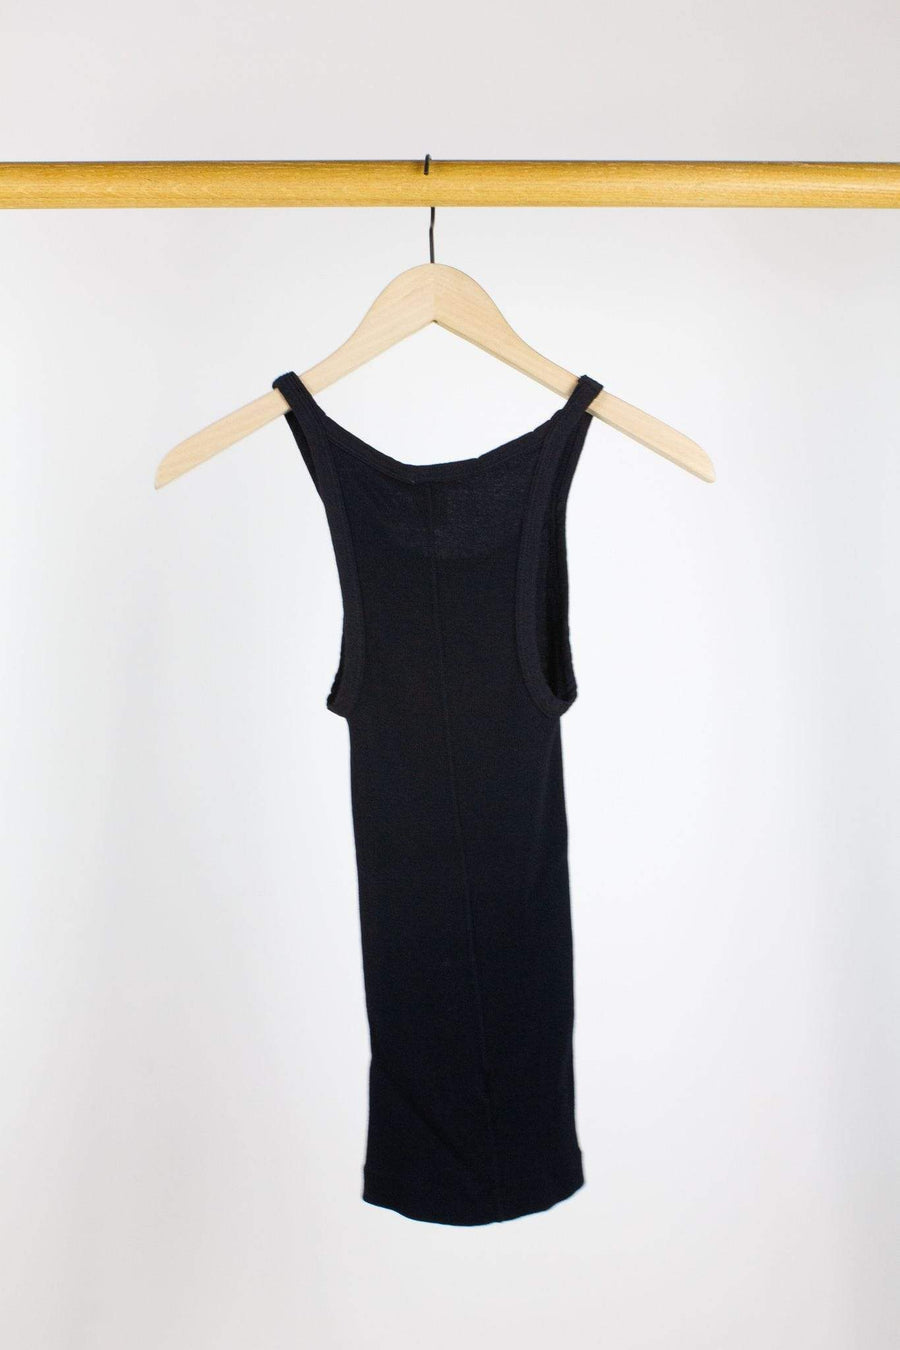 RE/DONE Tops Ribbed Tank Black